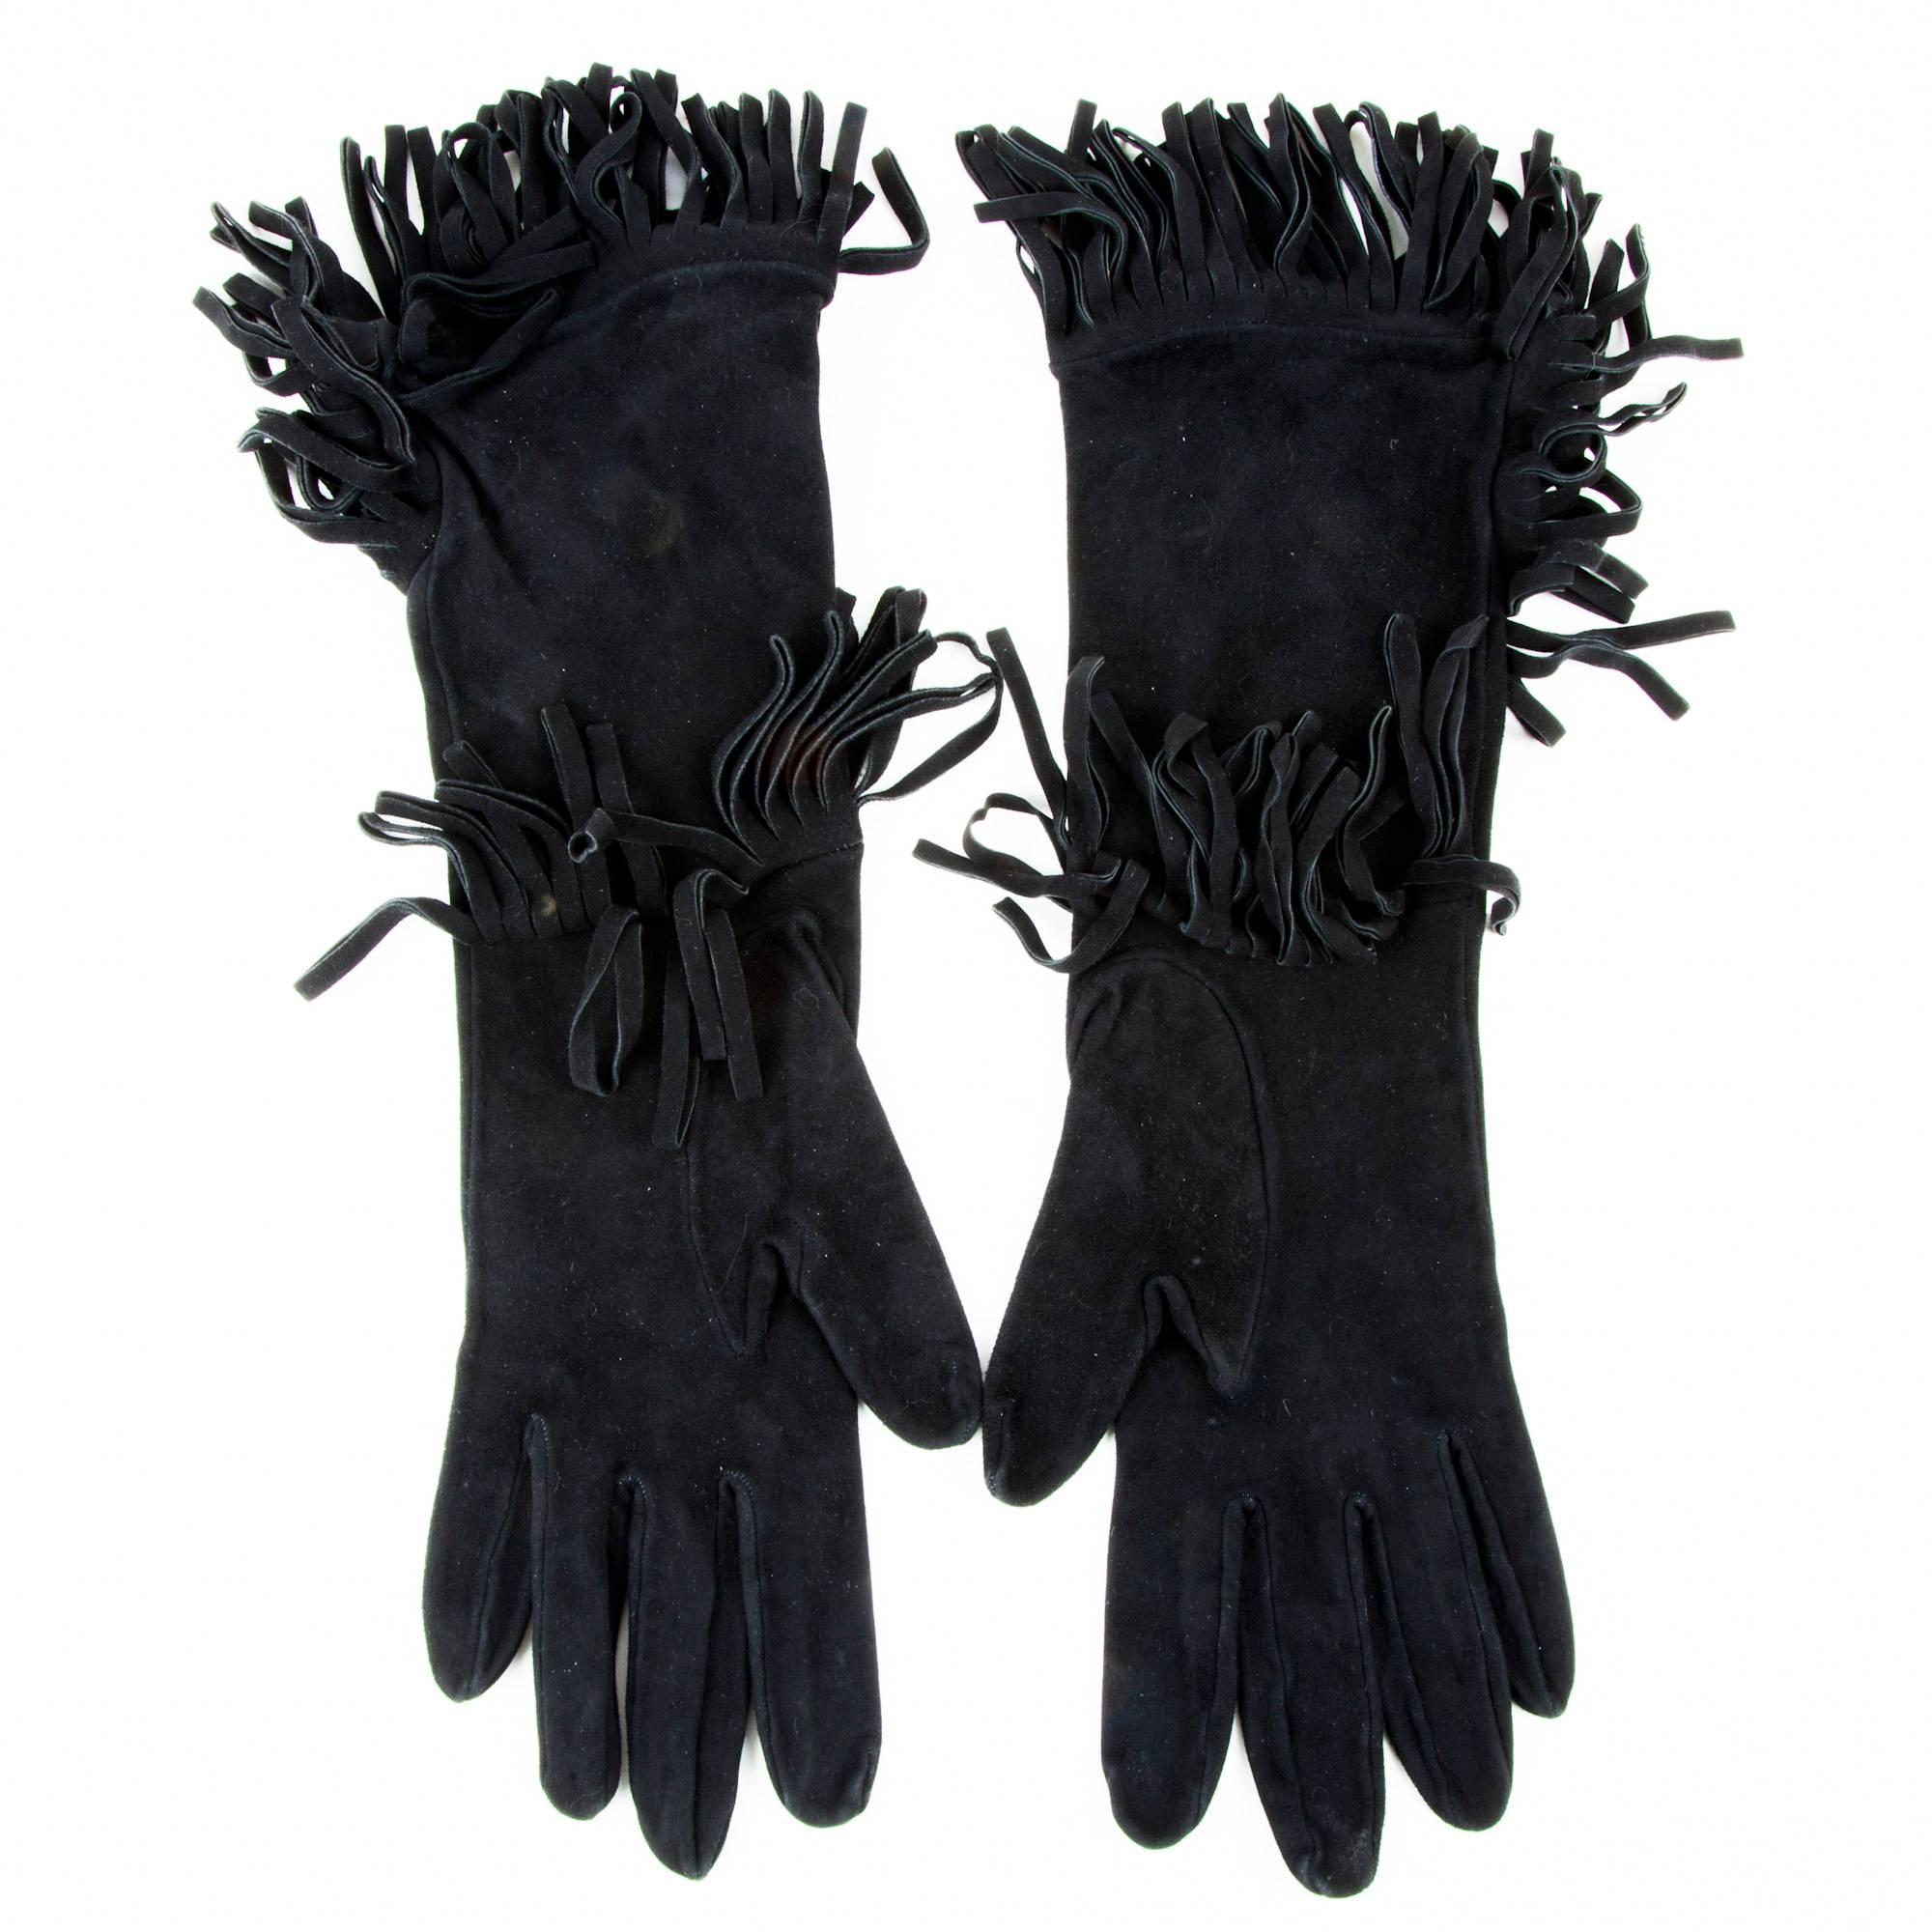 HERMES mid-length fringed gloves in black suede. 

Dimensions: wrist circumference 19 cm, under the thumb 13 cm, turn arm 24 cm.

Will be delivered in a Valois Vintage Paris pouch